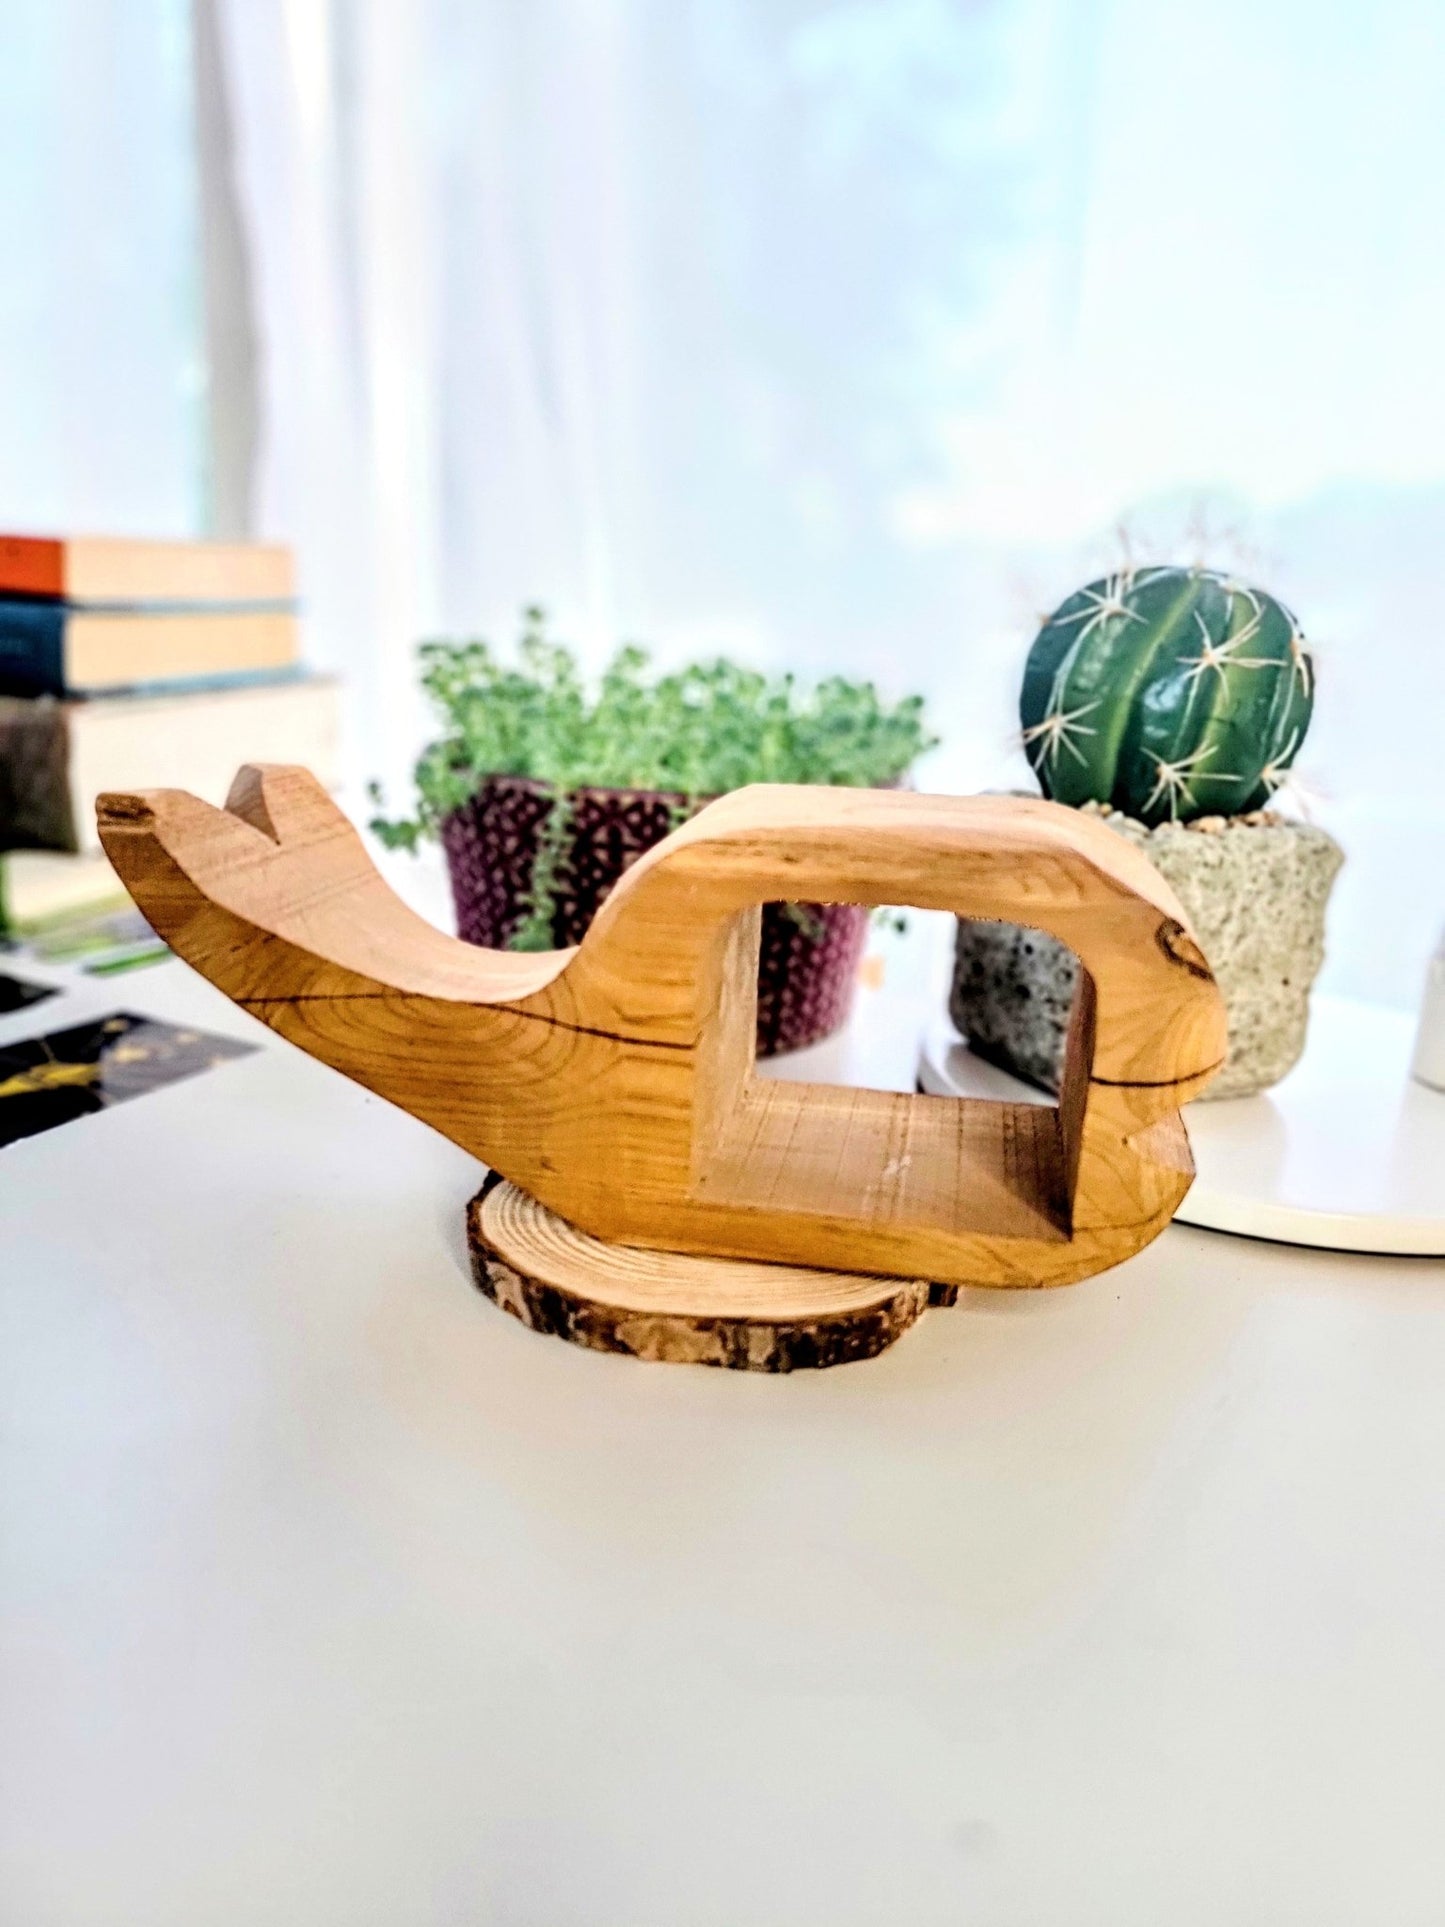 Handcarved Wooden Whale - Smash's Stashes